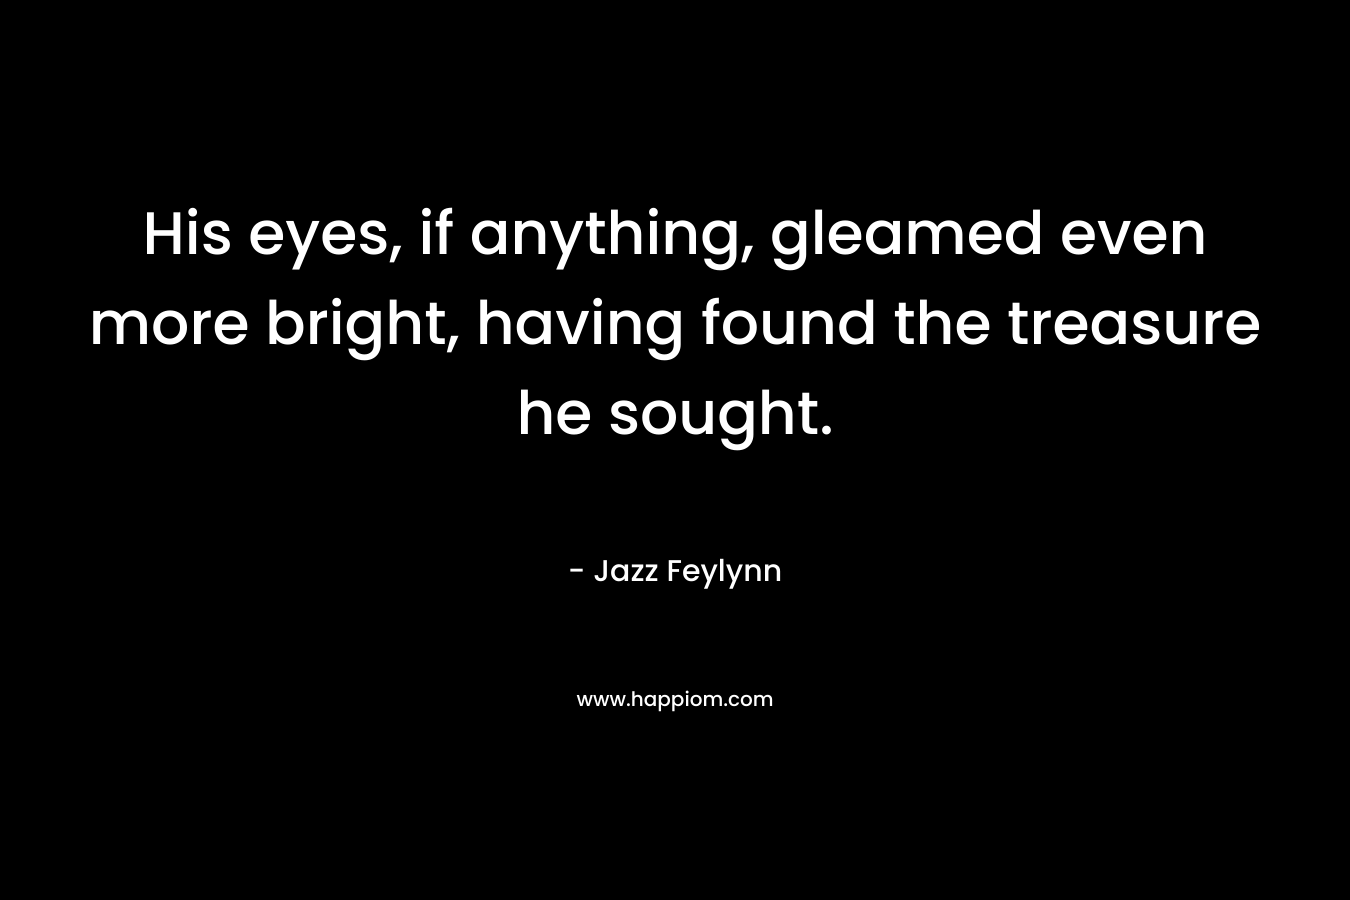 His eyes, if anything, gleamed even more bright, having found the treasure he sought. – Jazz Feylynn